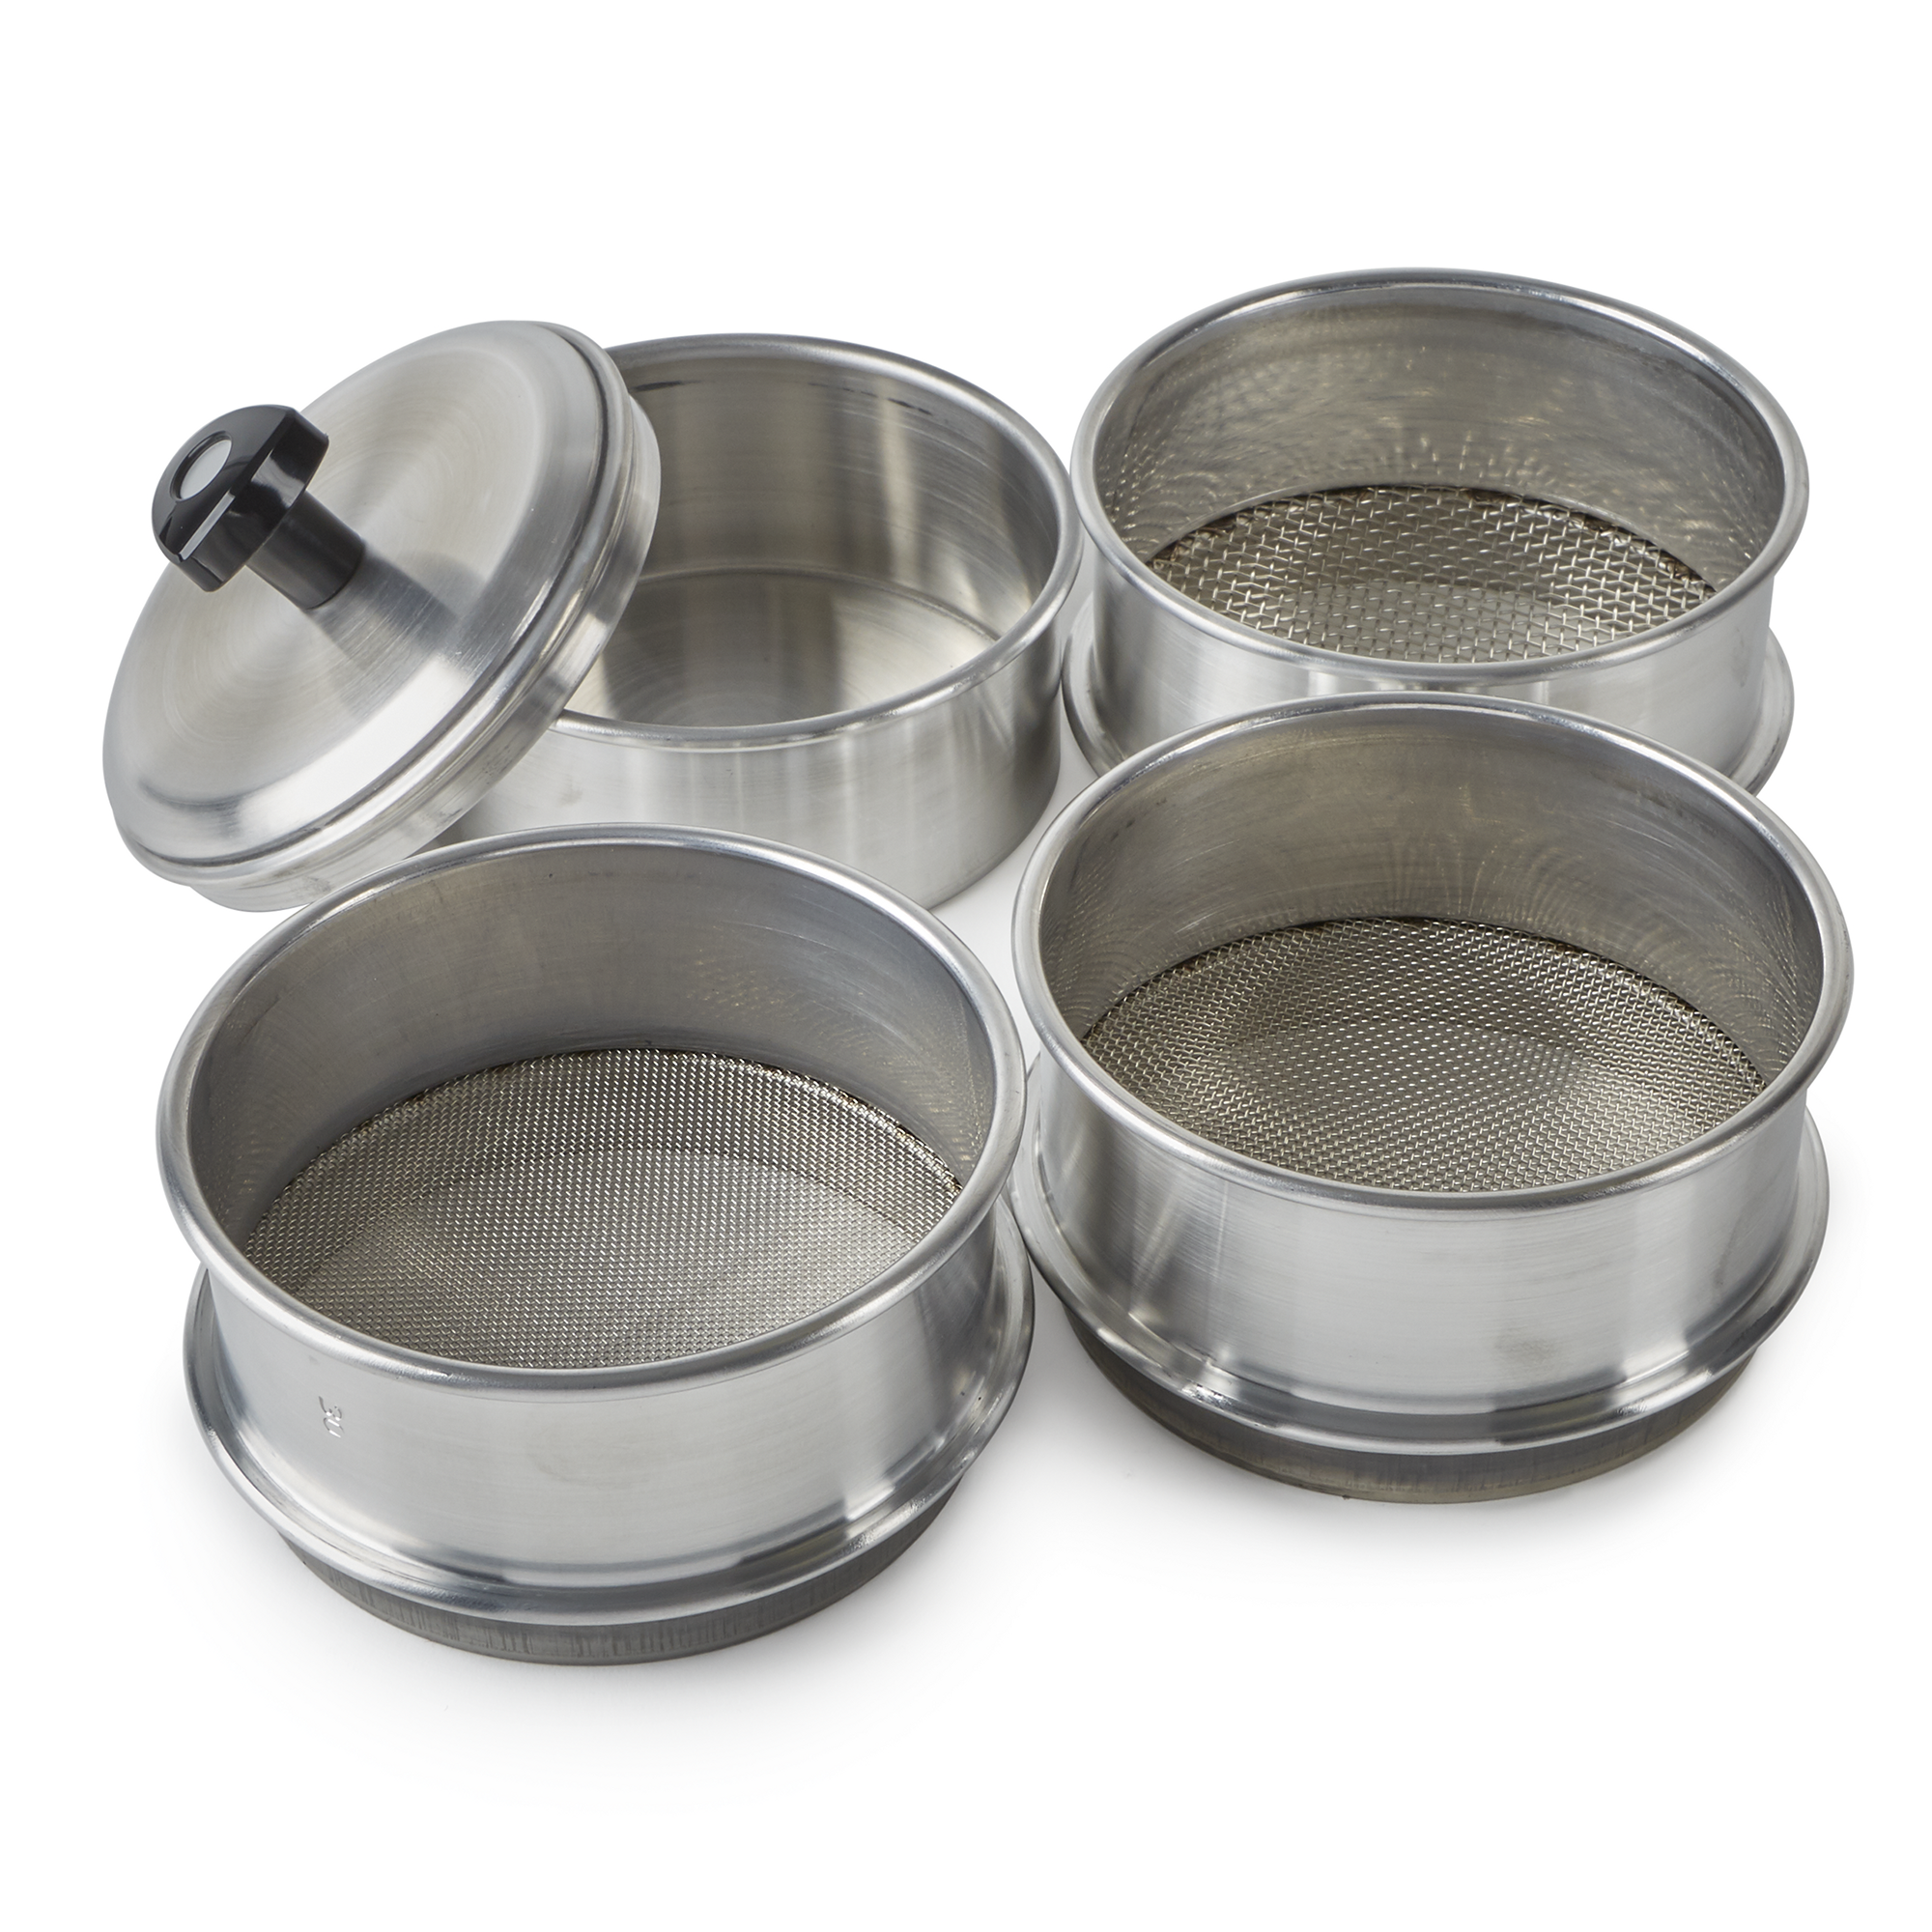 Sieves B8R01778 - Stainless Steel Sieves - Pack of 3 with Different Meshes |  Philip Harris